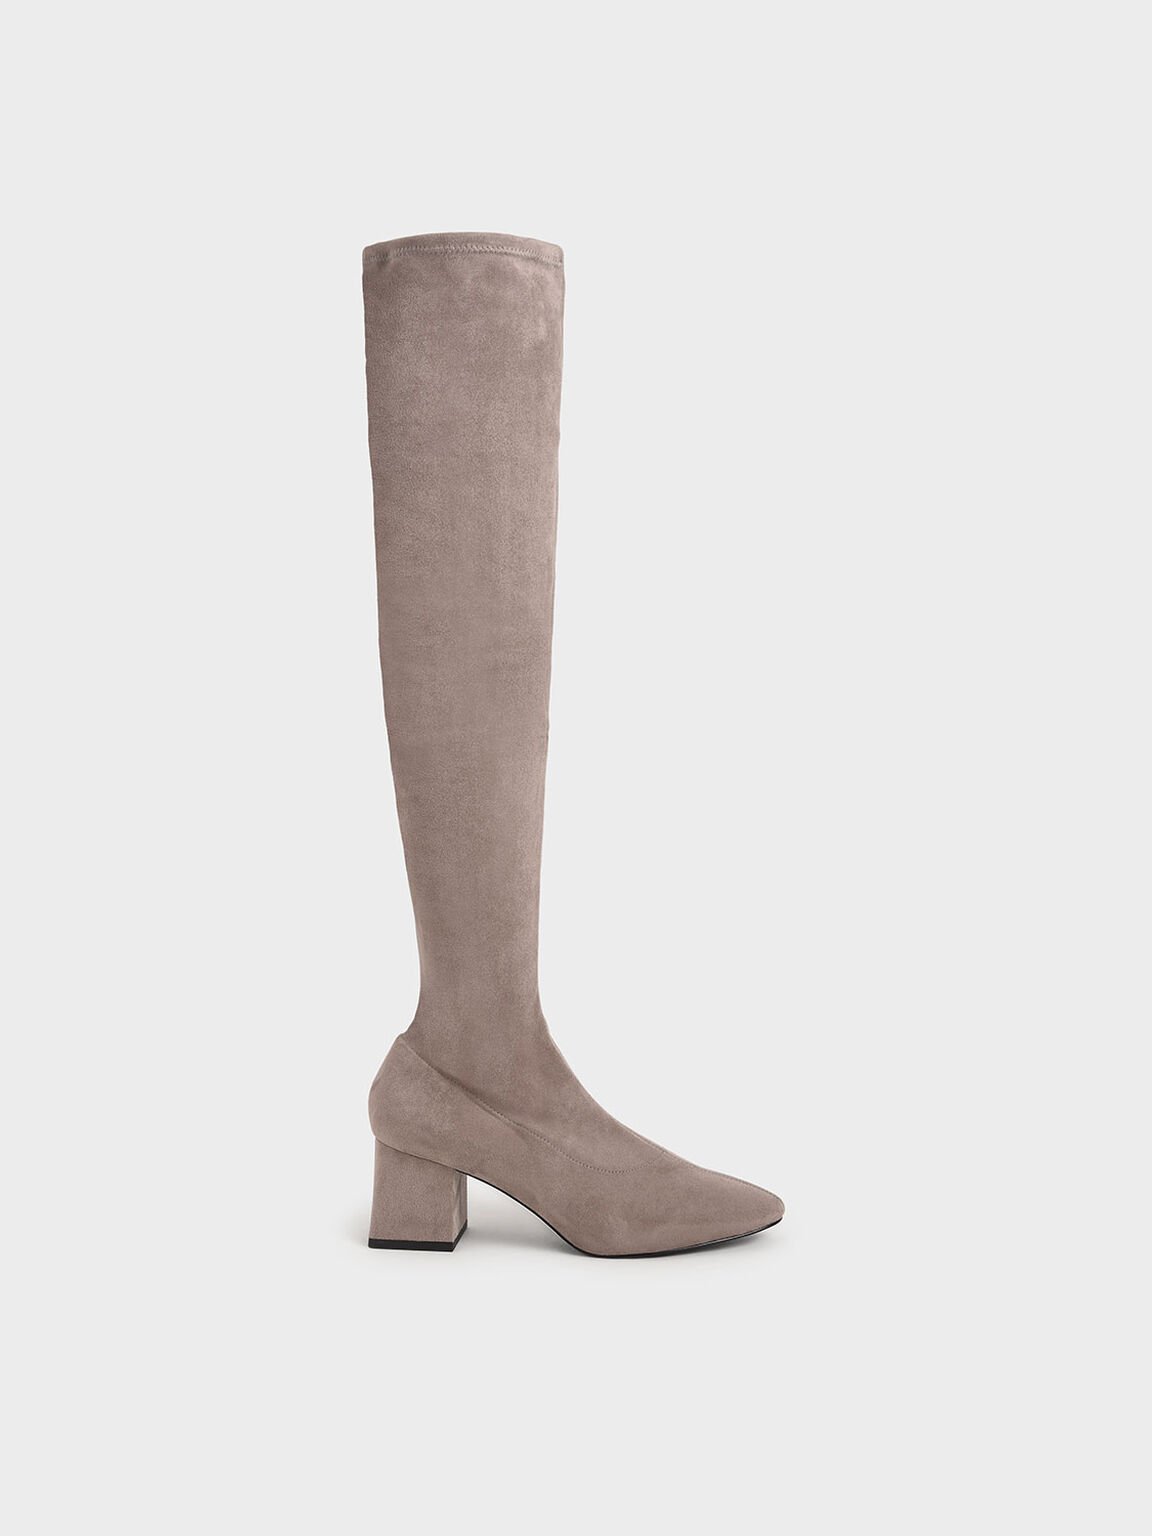 Textured Thigh High Boots, Taupe, hi-res